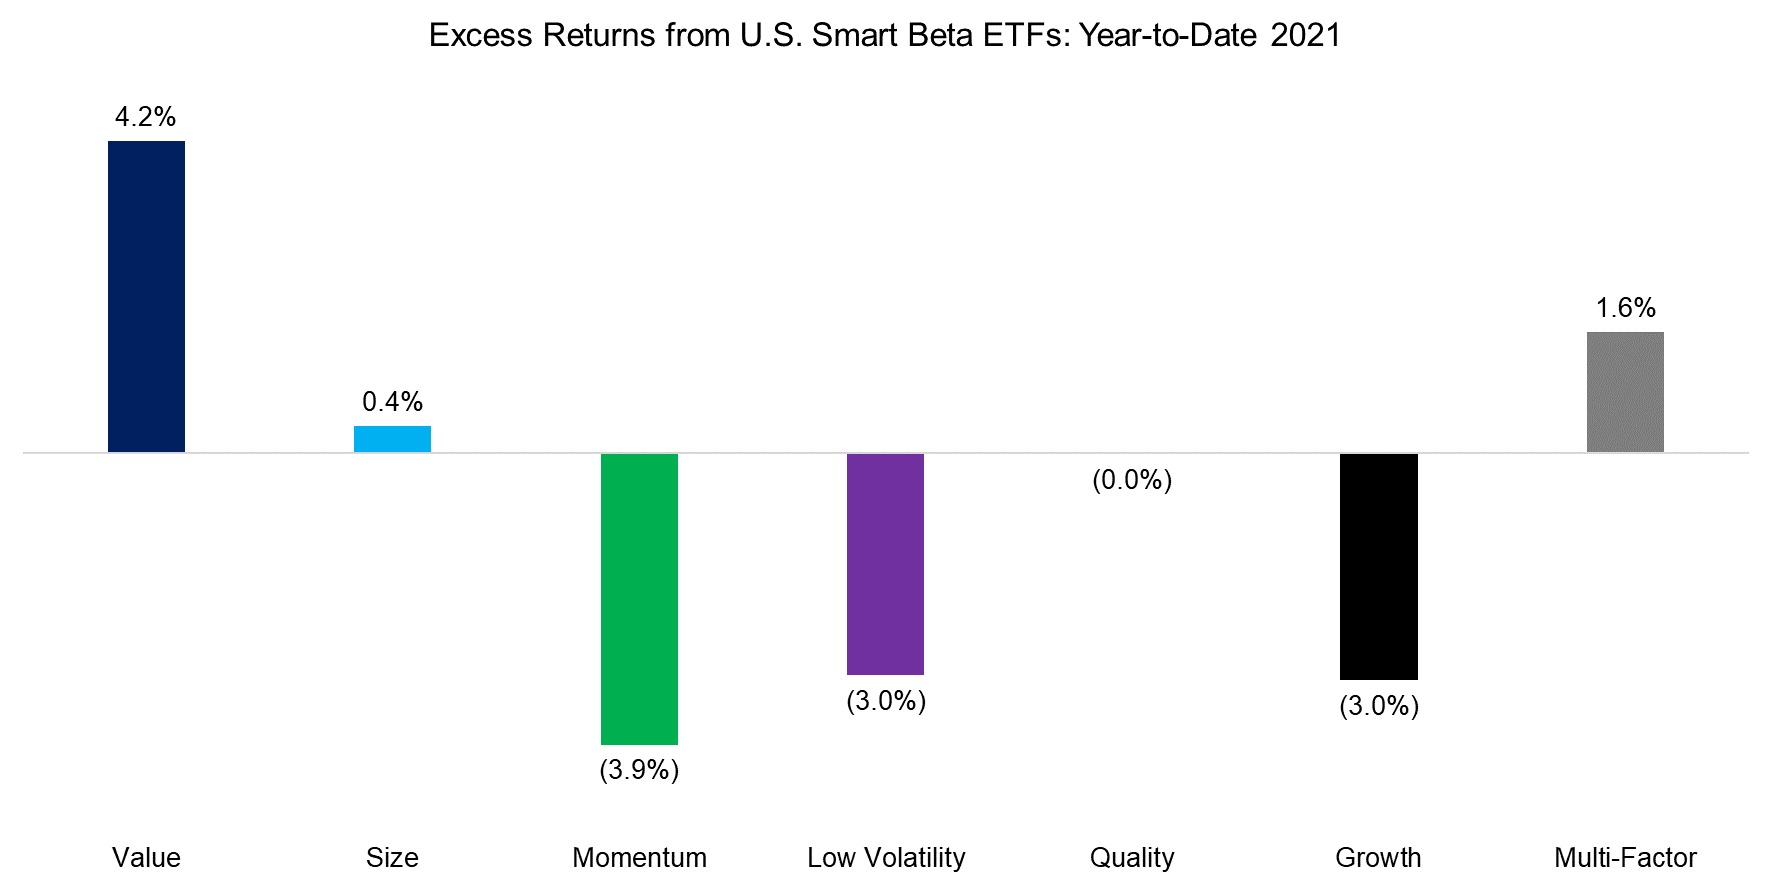 Excess Returns from US Smart Beta ETFs Year-to-Date 2021